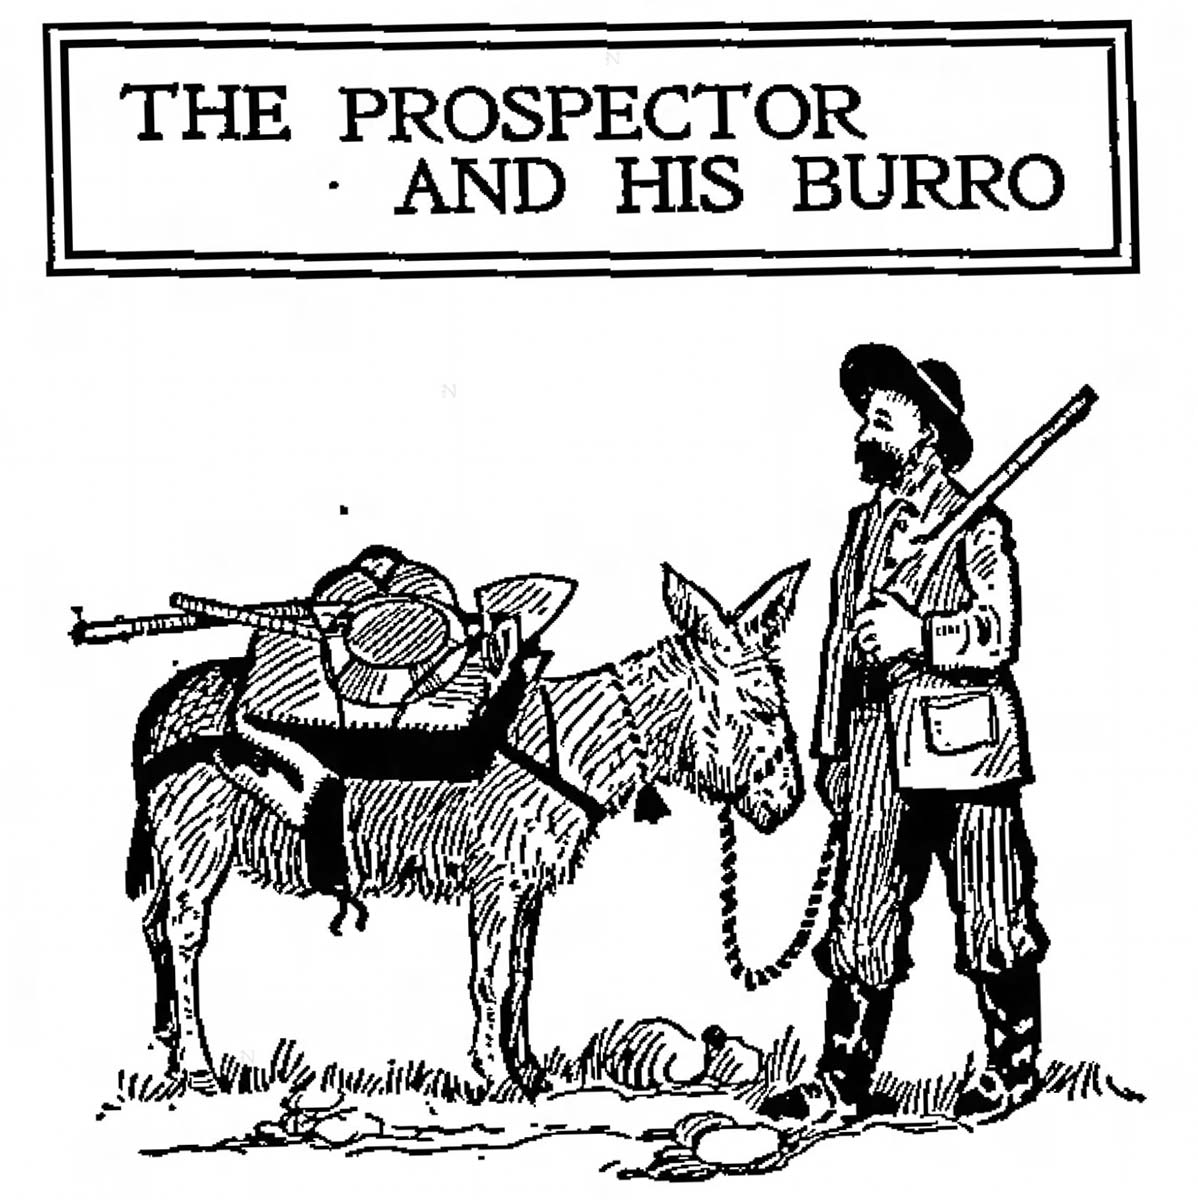 The prospector and his burro